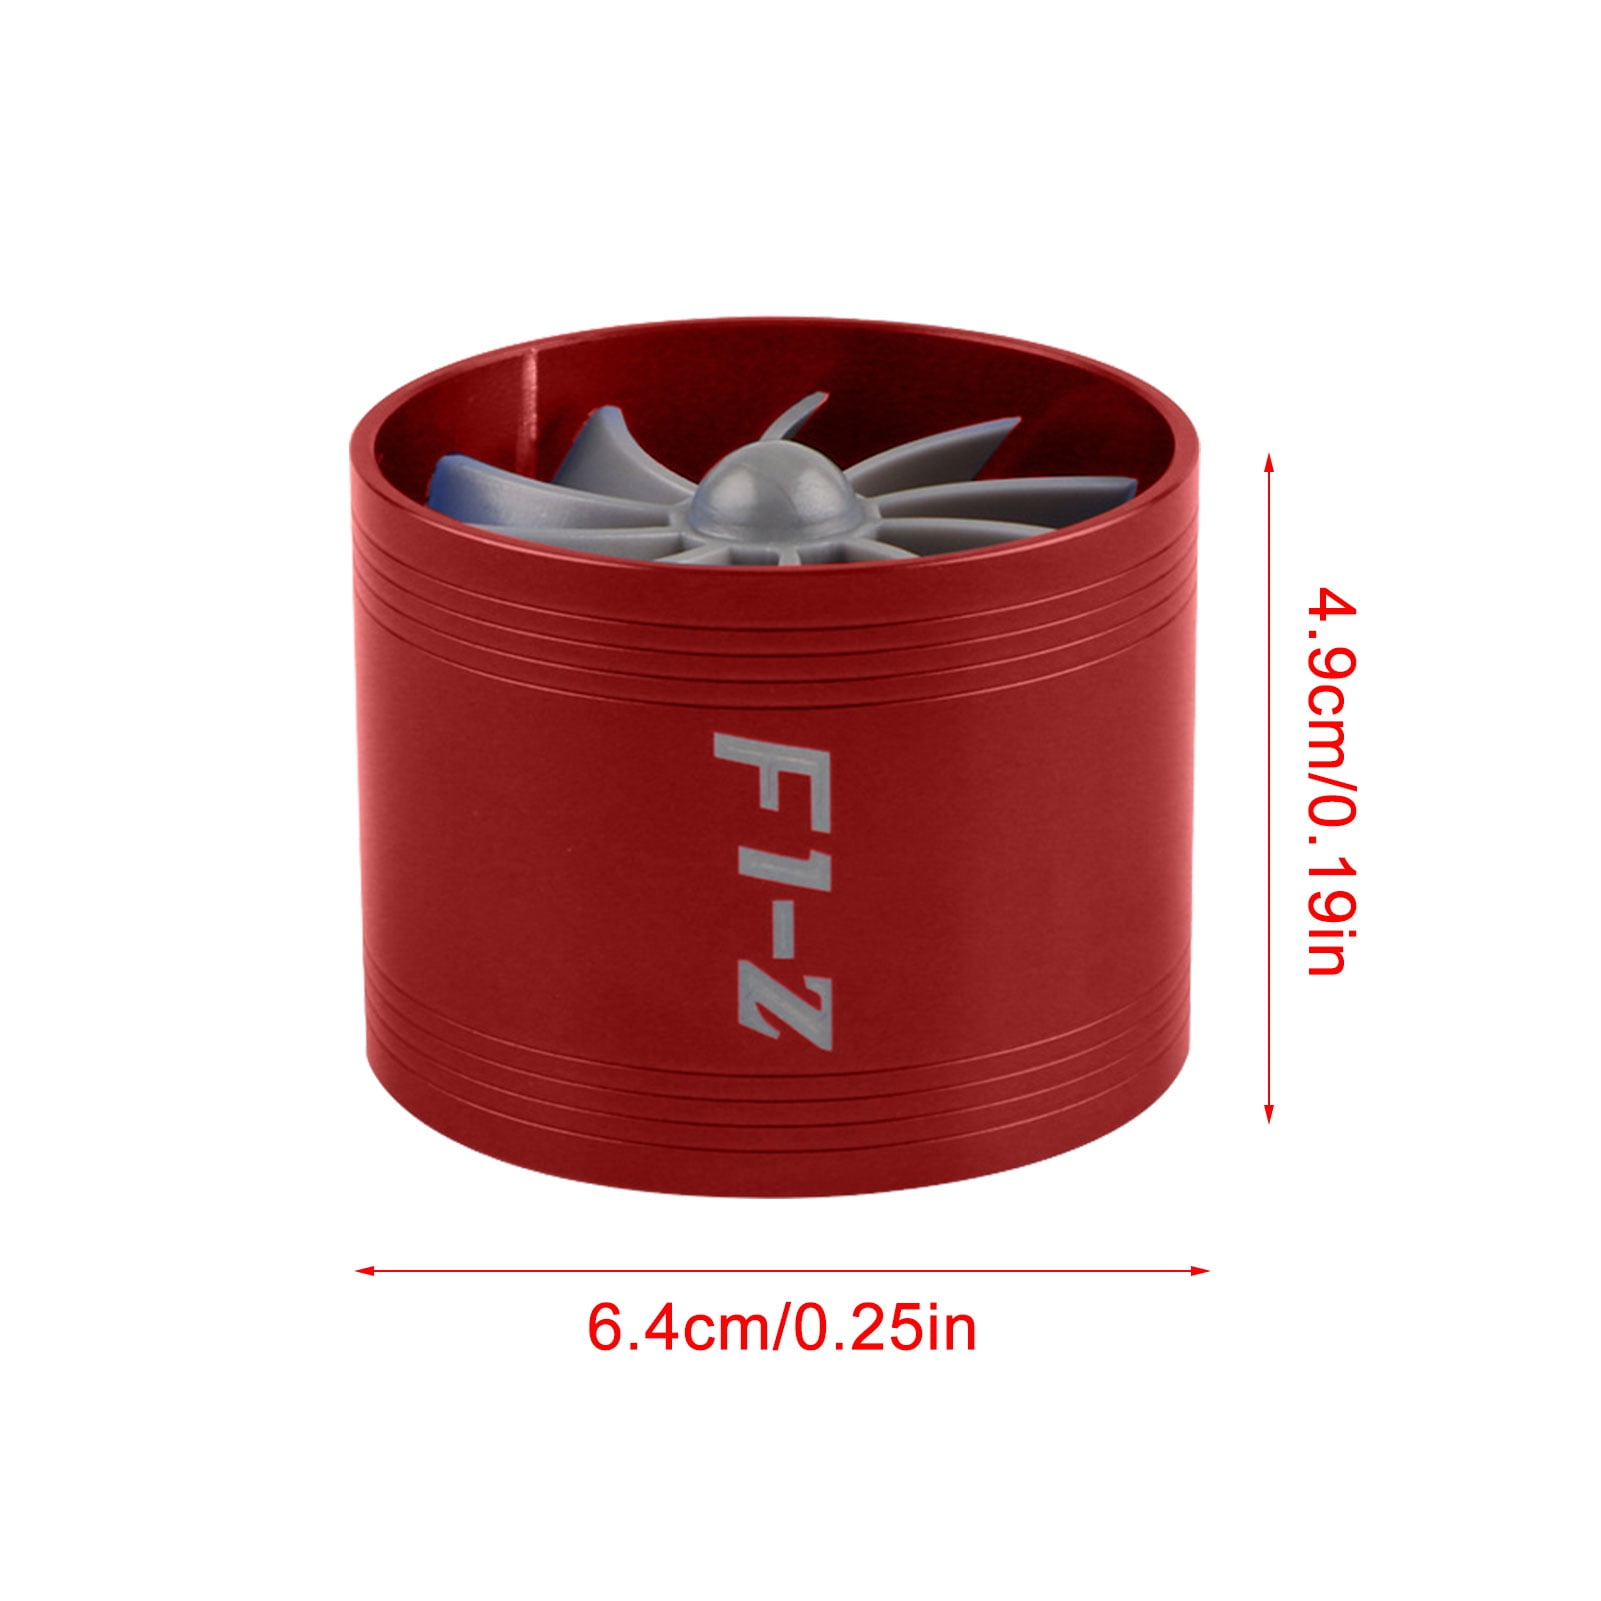 For HONDA 64-74mm TURBO CHARGER Racing AIR INTAKE TURBINE Fuel Saver Fan RED